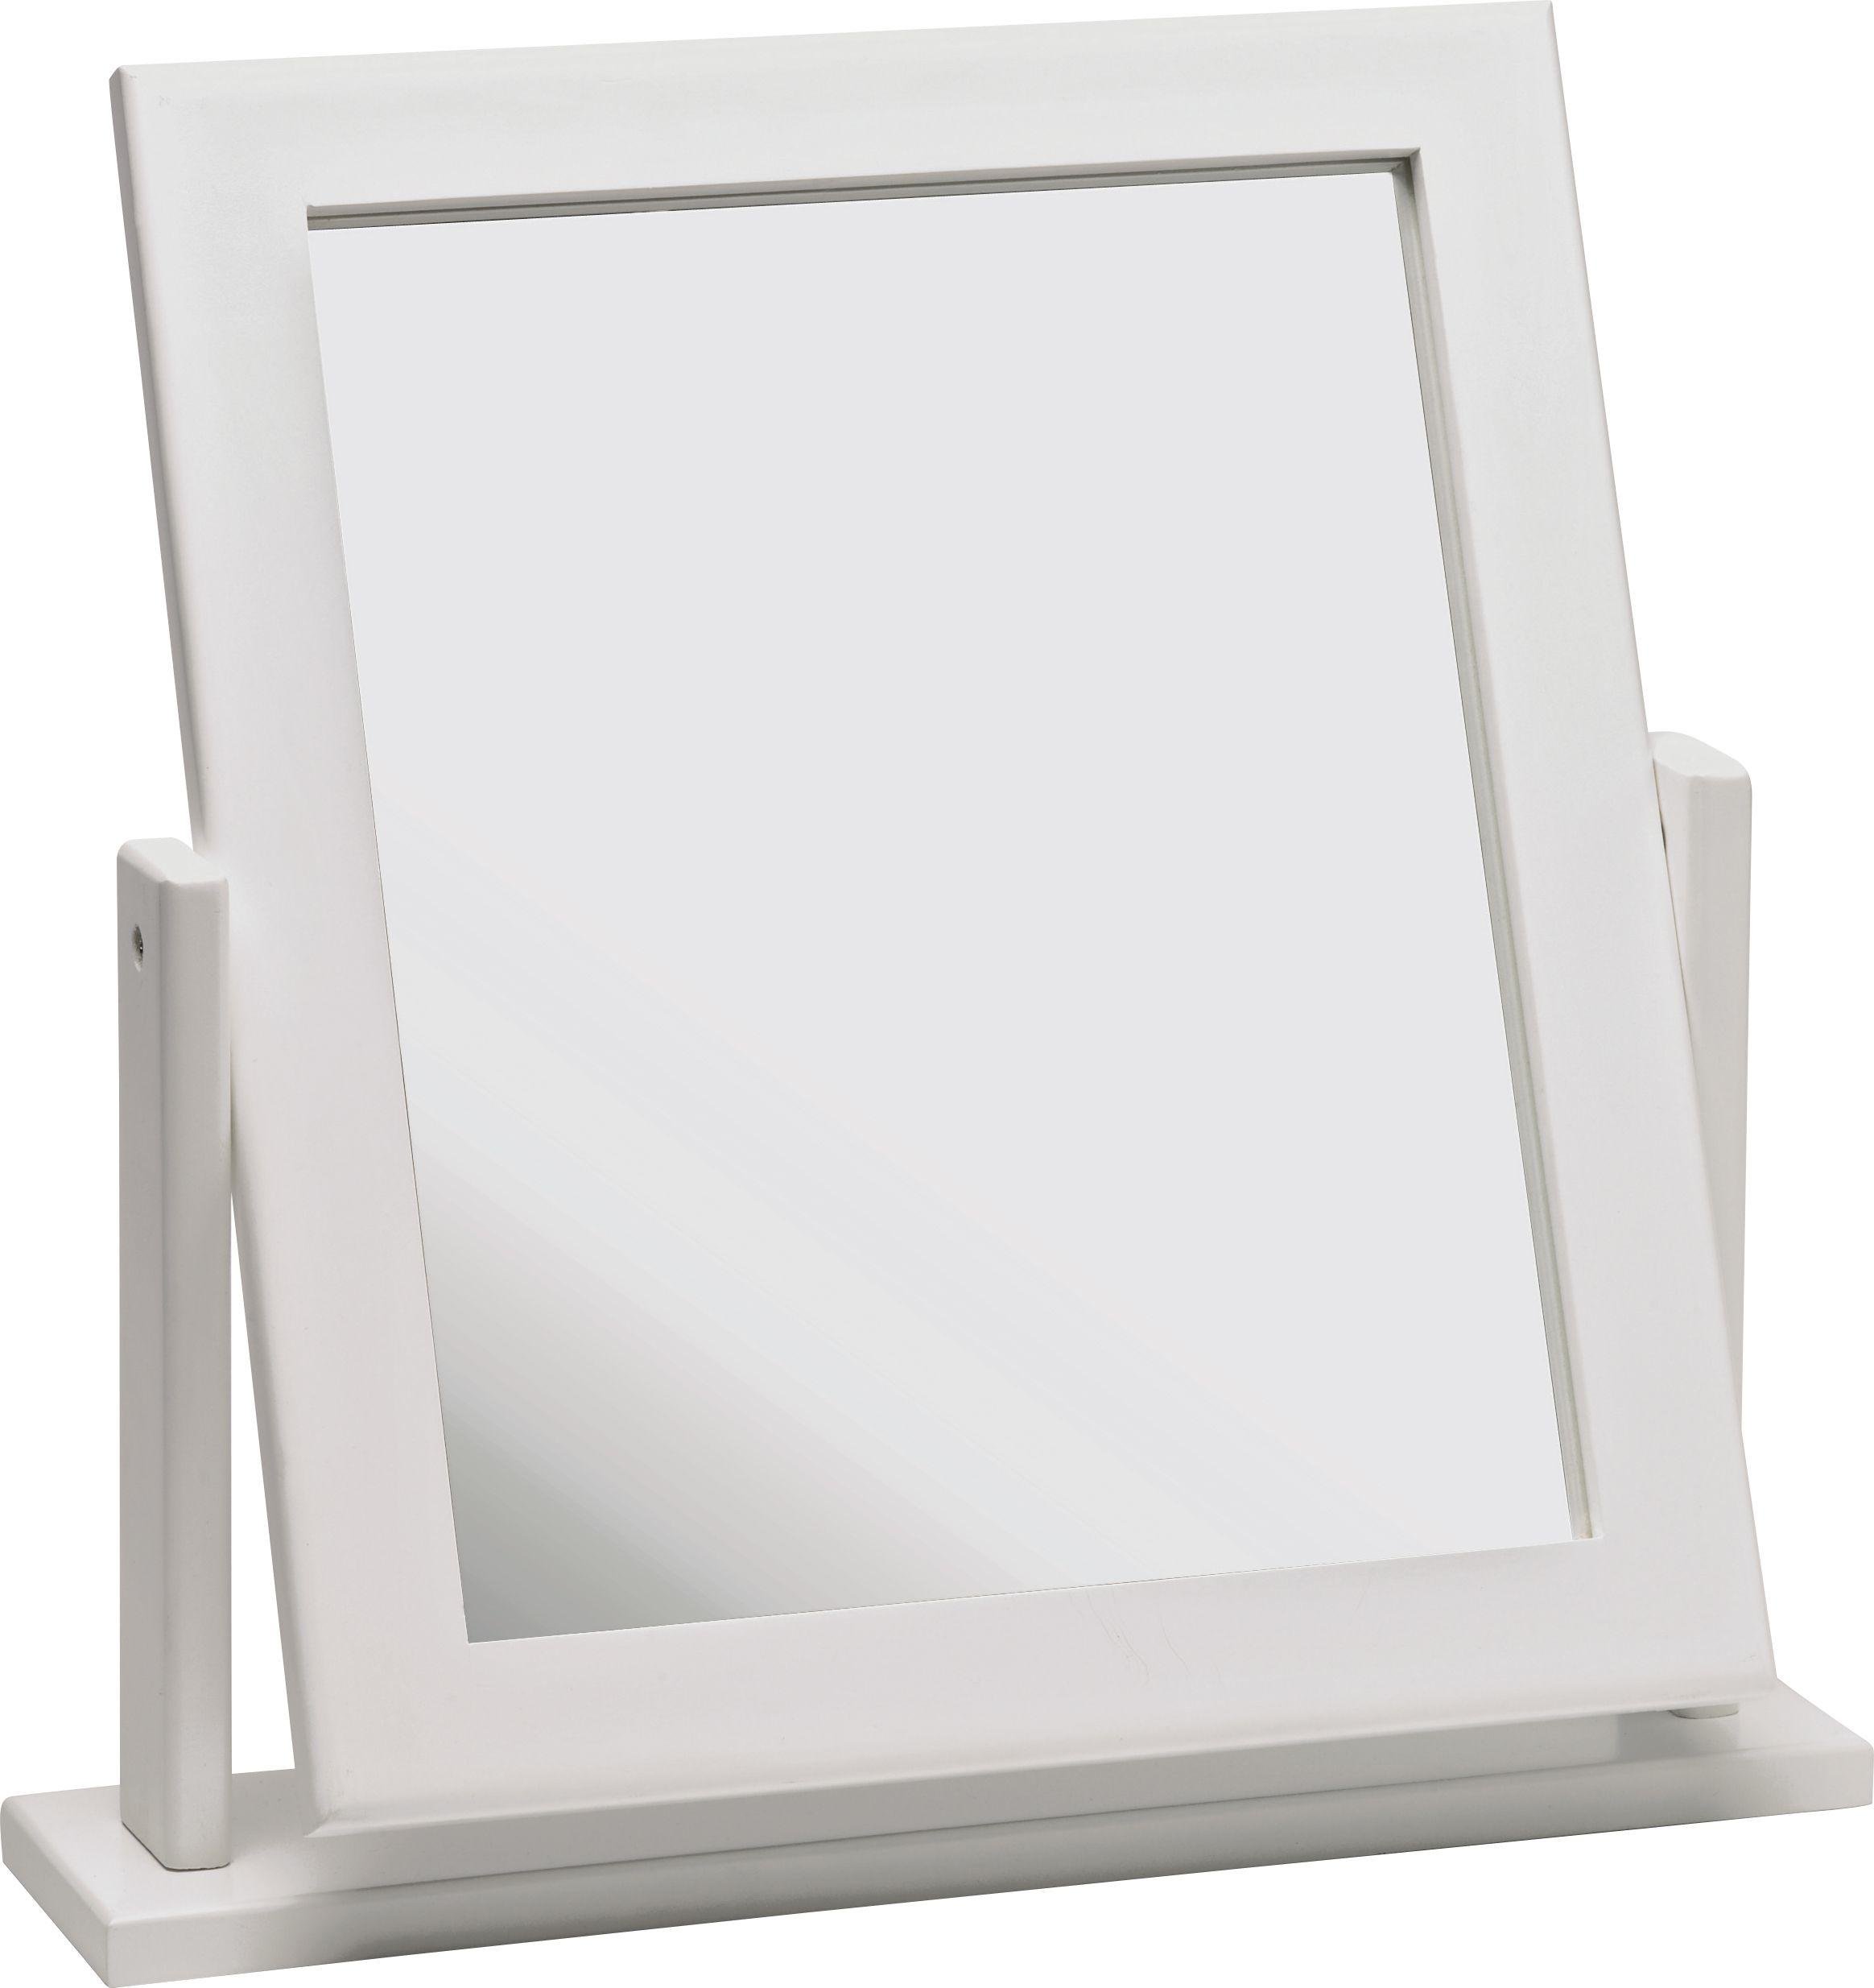 dressing table mirrors home square dressing table mirror - white624/0156 JVMDAIH